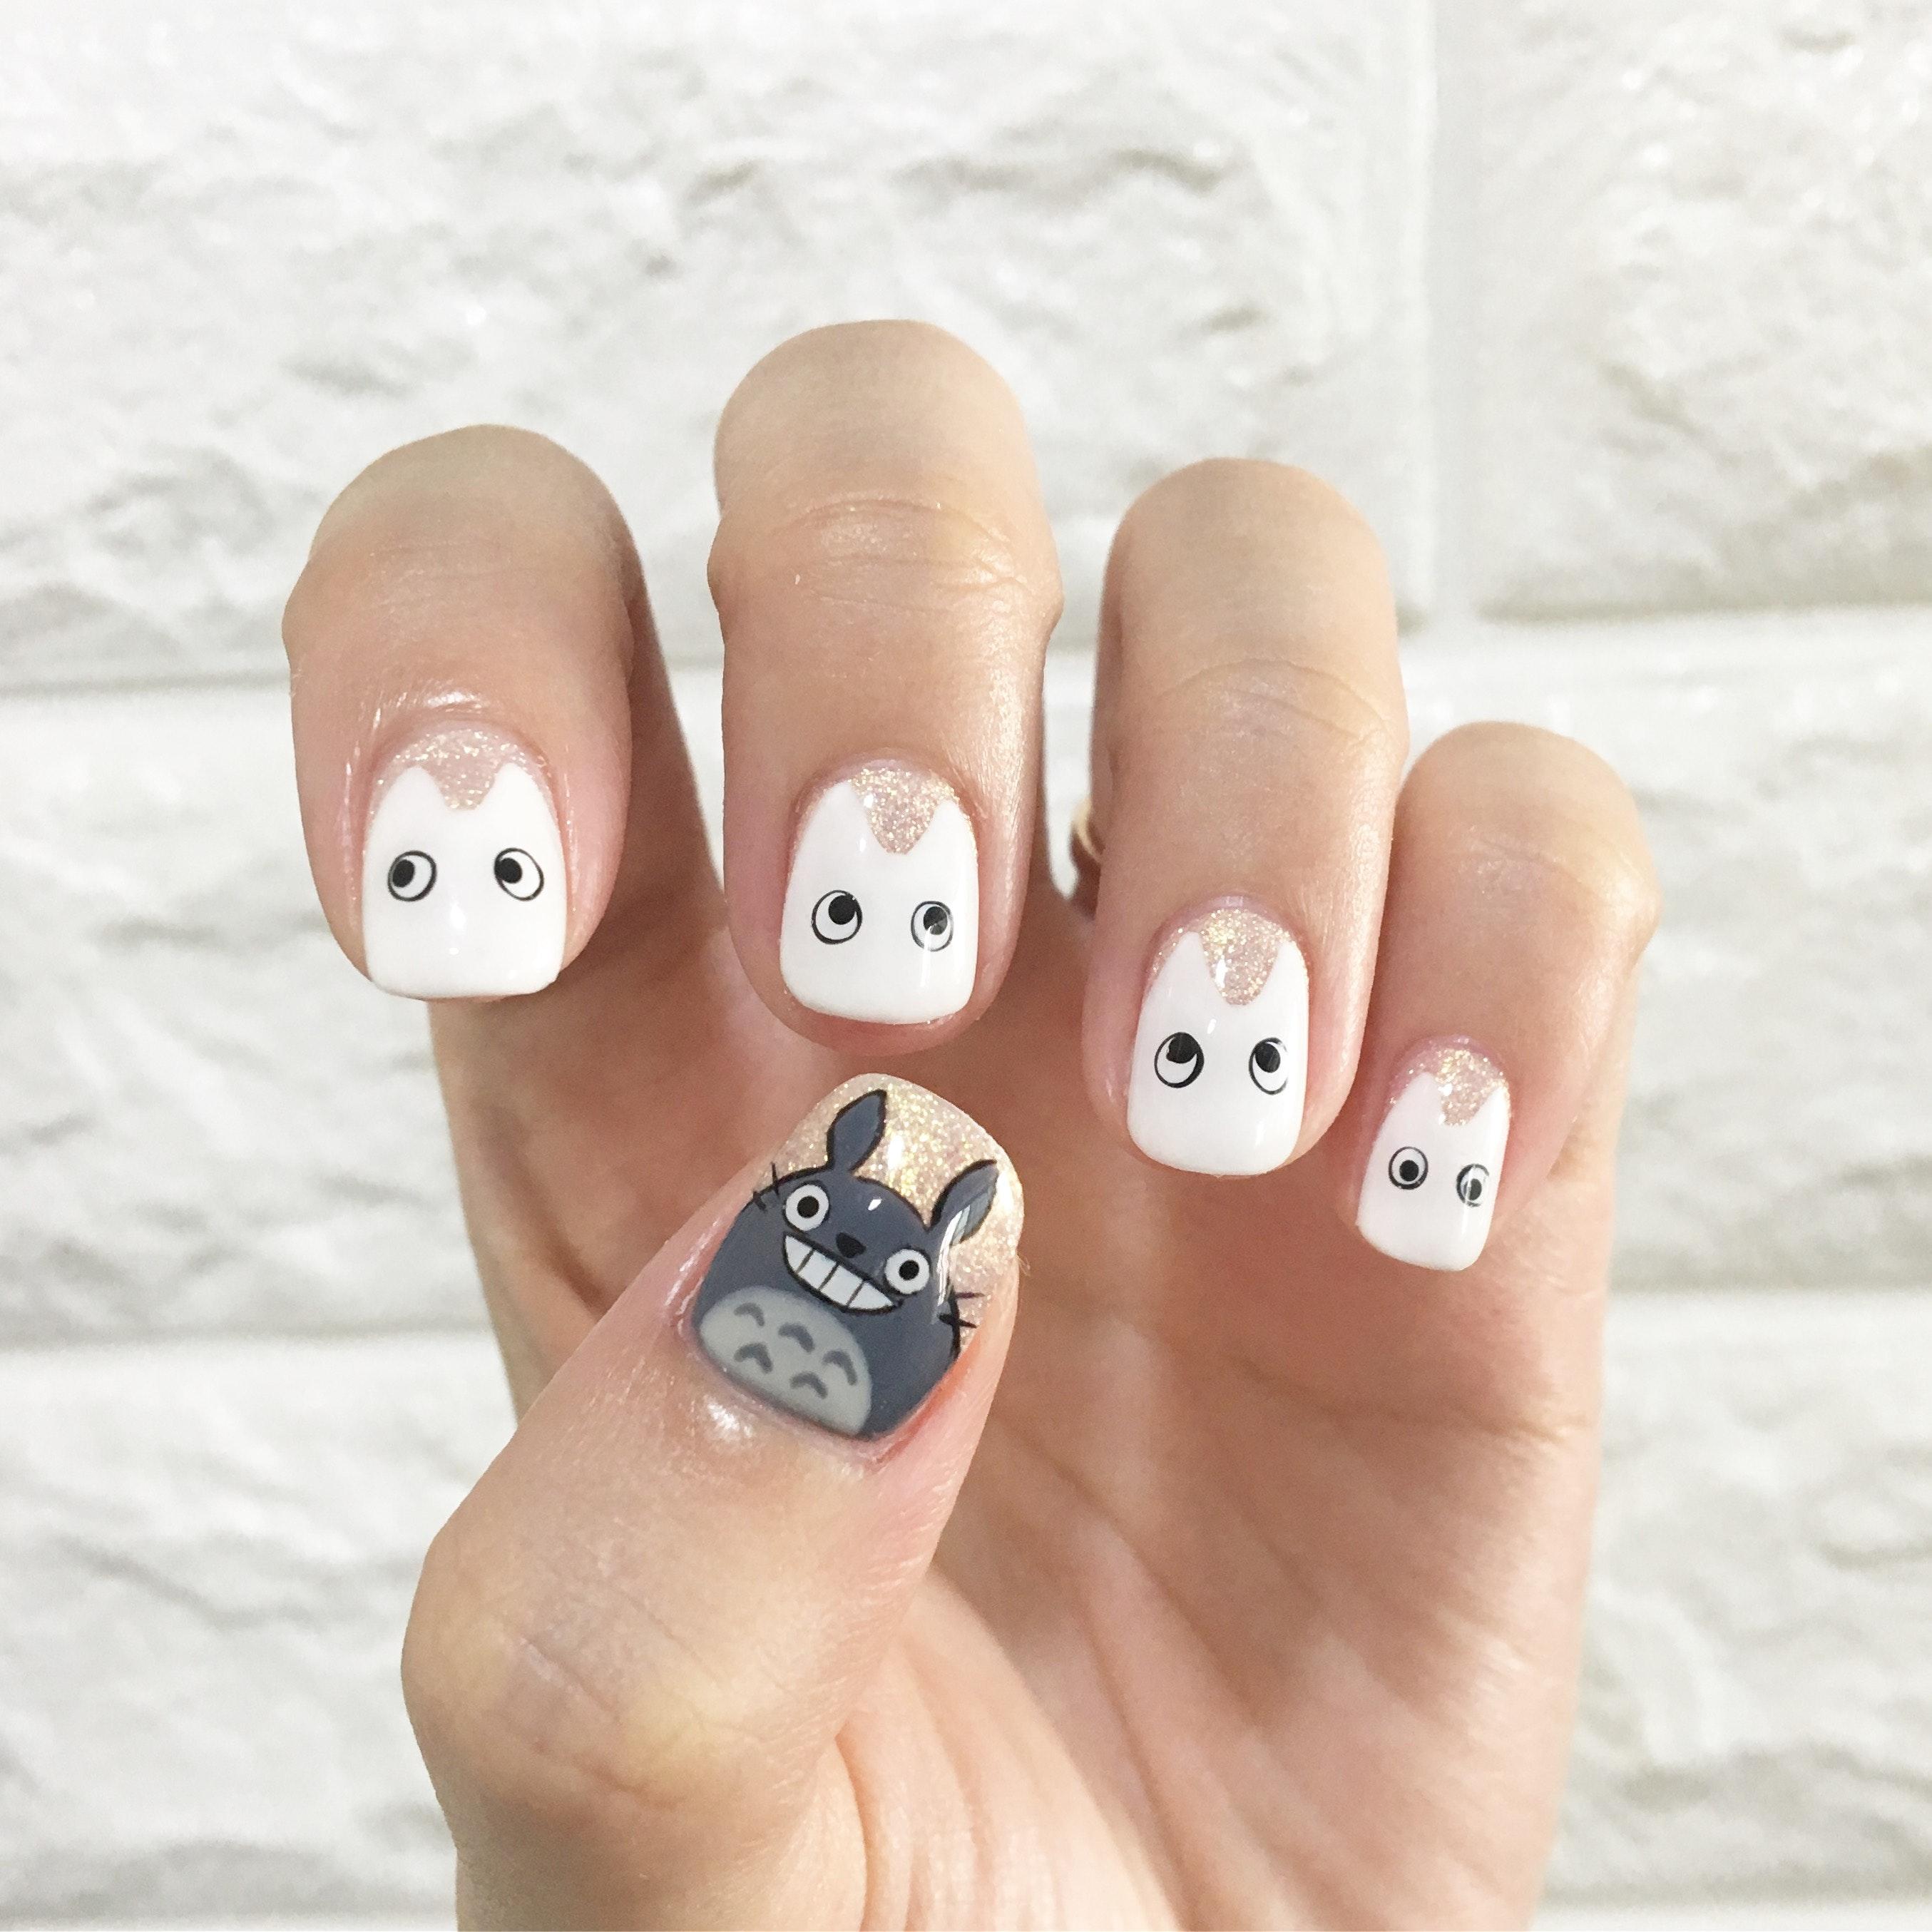 Do You Have To Be Licensed To Do Nail Art 